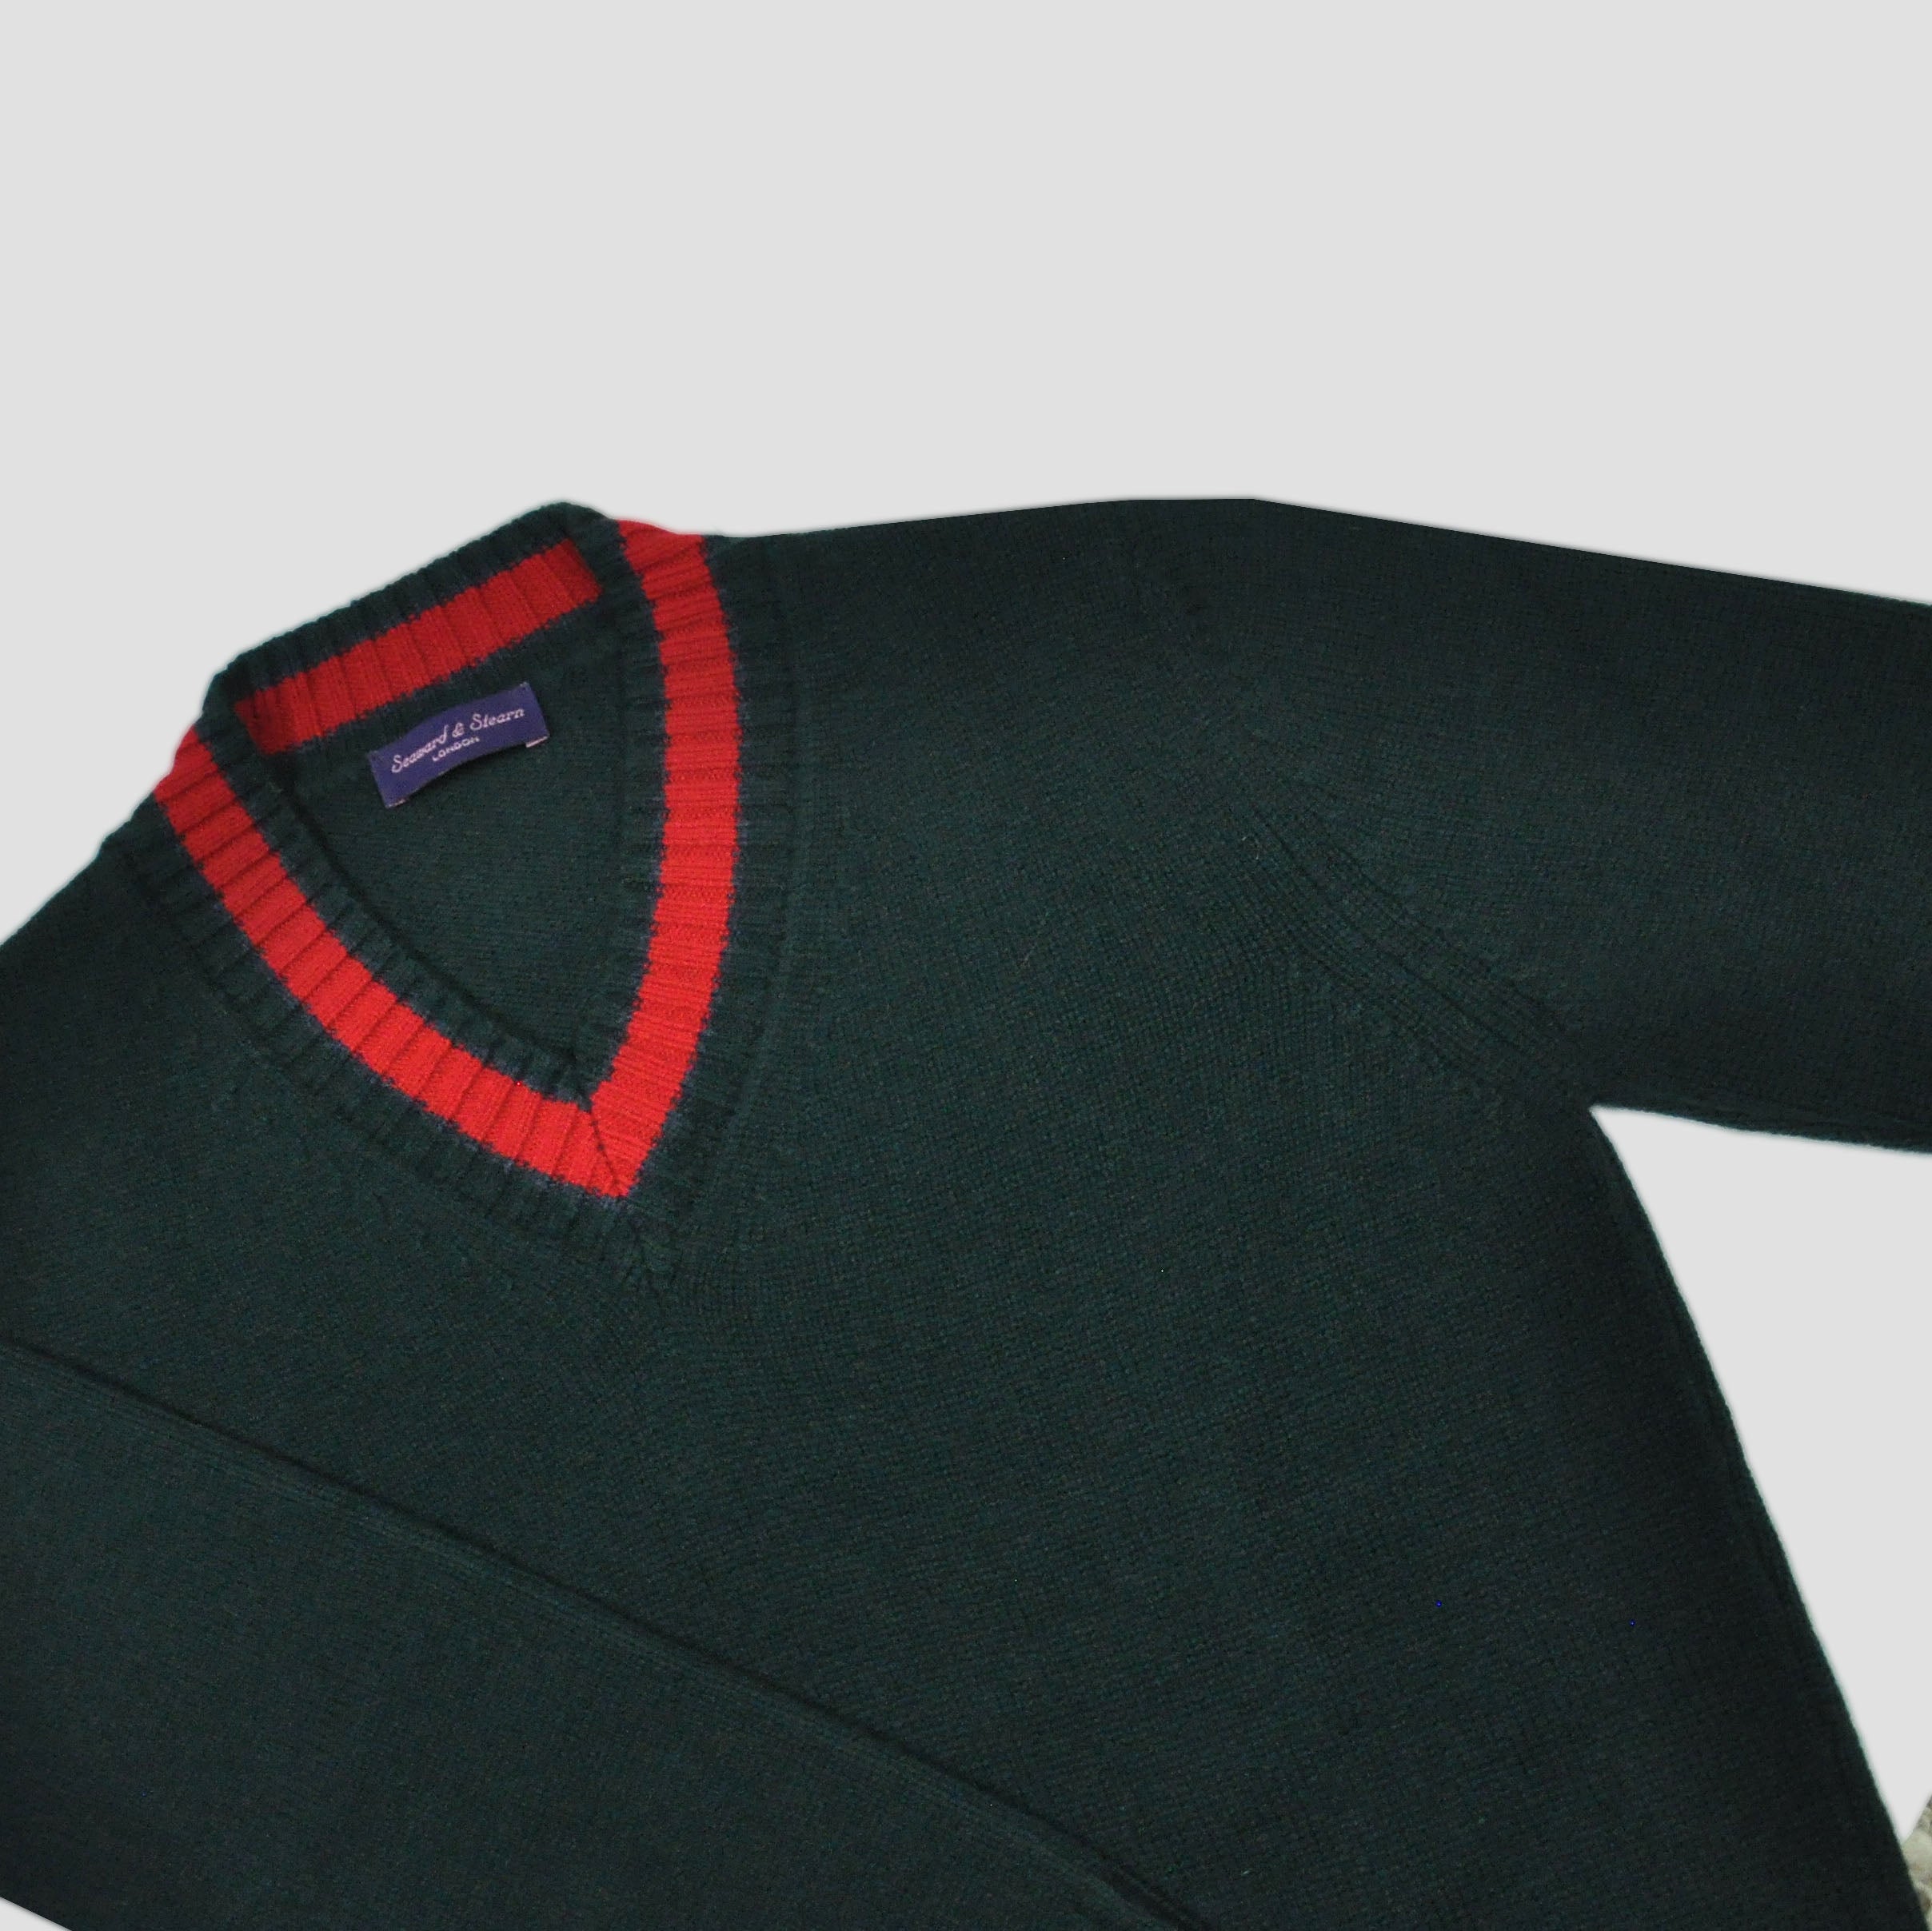 Merino Wool V-Neck Cricket Style Jumper in Bottle Green with Red Trim